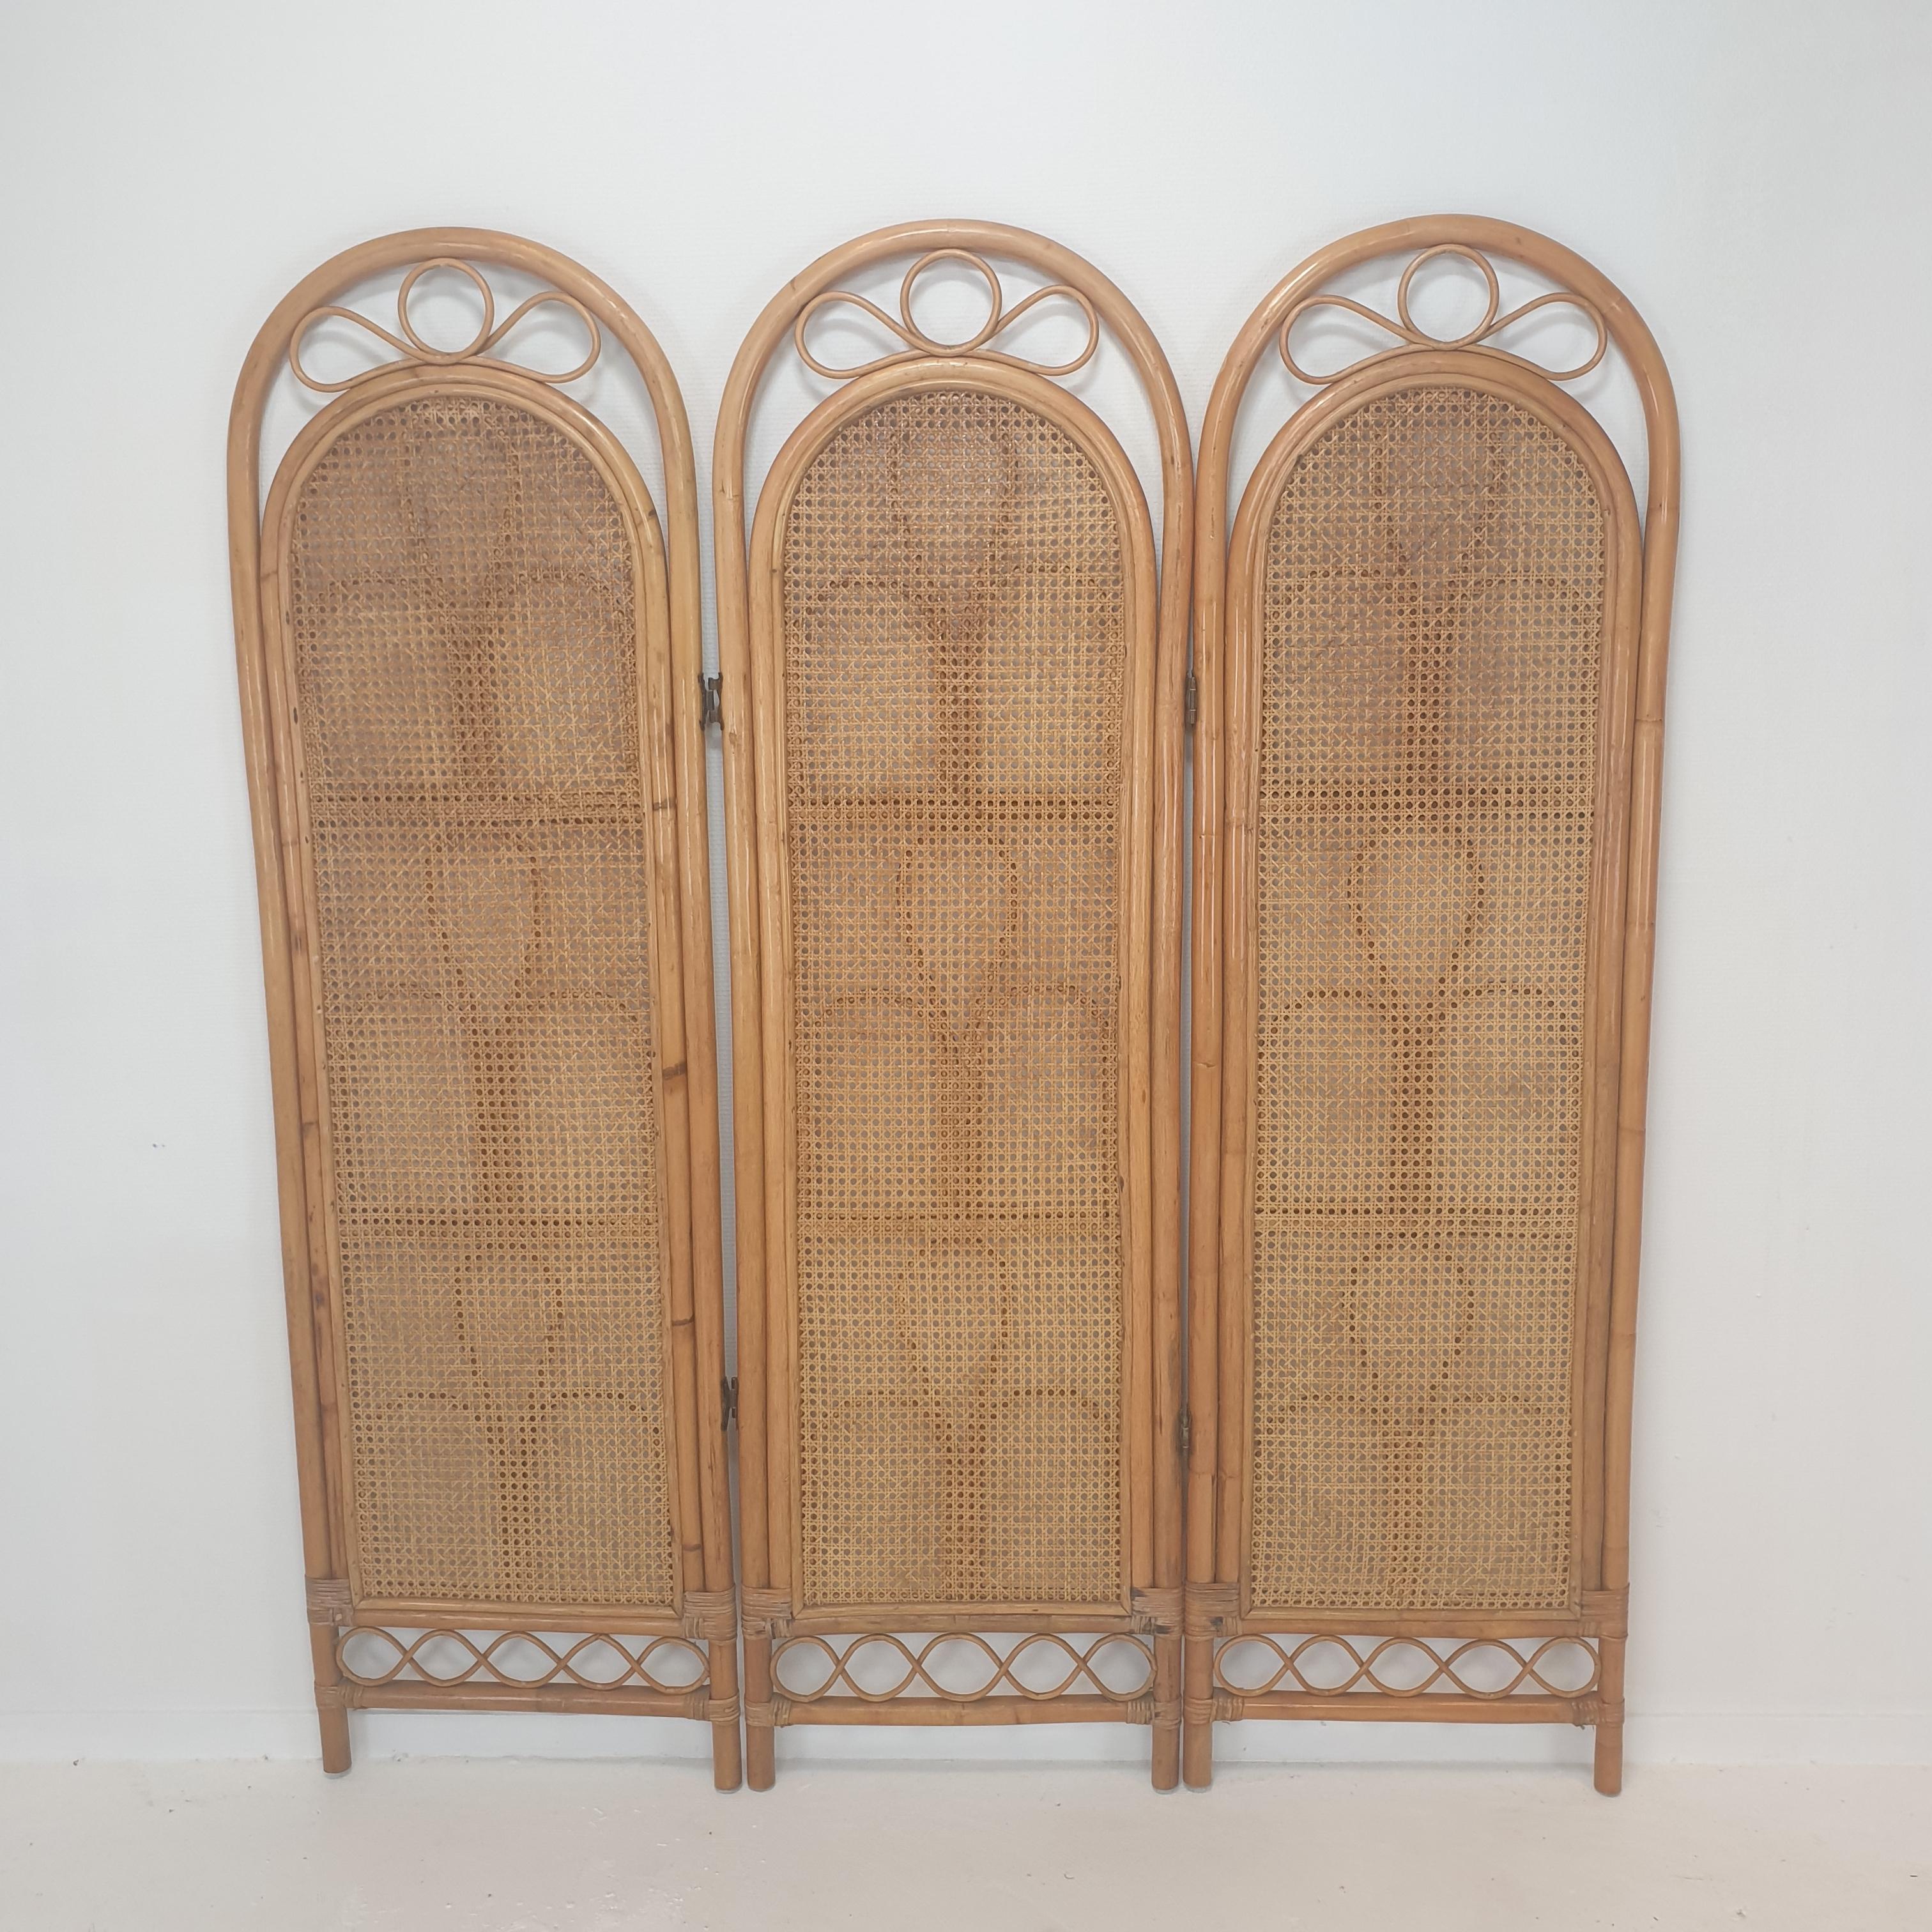 Italian Room Divider in Rattan and Wicker, 1960s For Sale 5